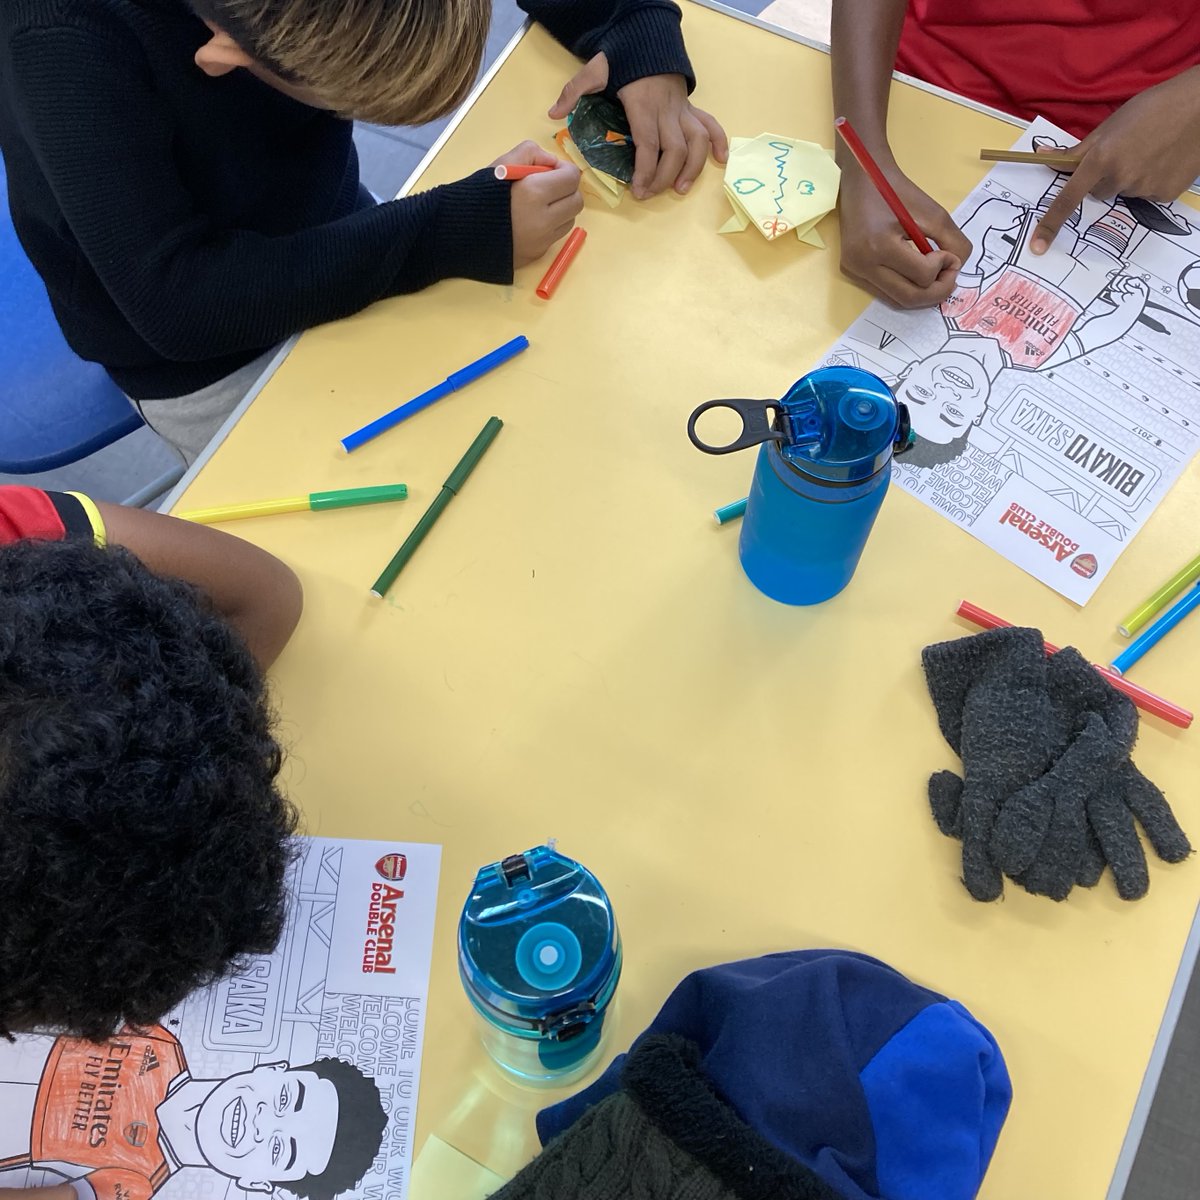 📚🤝⚽️A brilliant Double Club Camp at Argyle Primary School this week

🎯The theme was Aim High, and we finished with origami and colouring for 'Mindful Friday'

💪Well done to all the #StrongYoungGunners and coaches!

#DoubleClubis25 #Camden #Arsenal #PLSupports